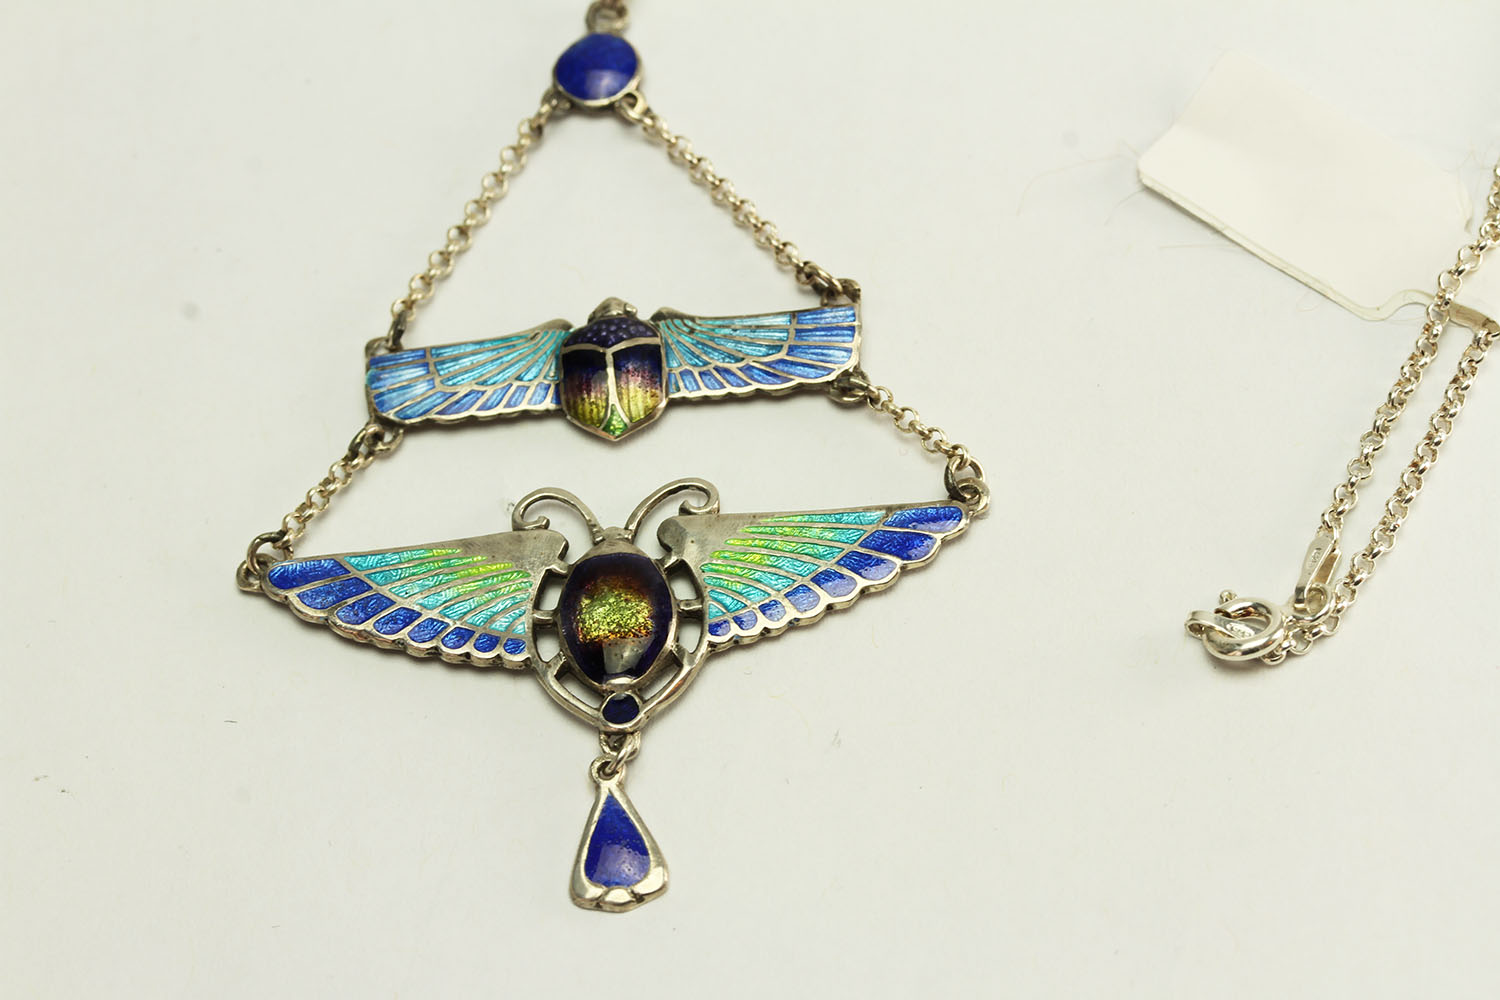 Silver and Blue Enamel Necklace, 2 hanging insects with blue and green enamel detail, chain - Image 2 of 2